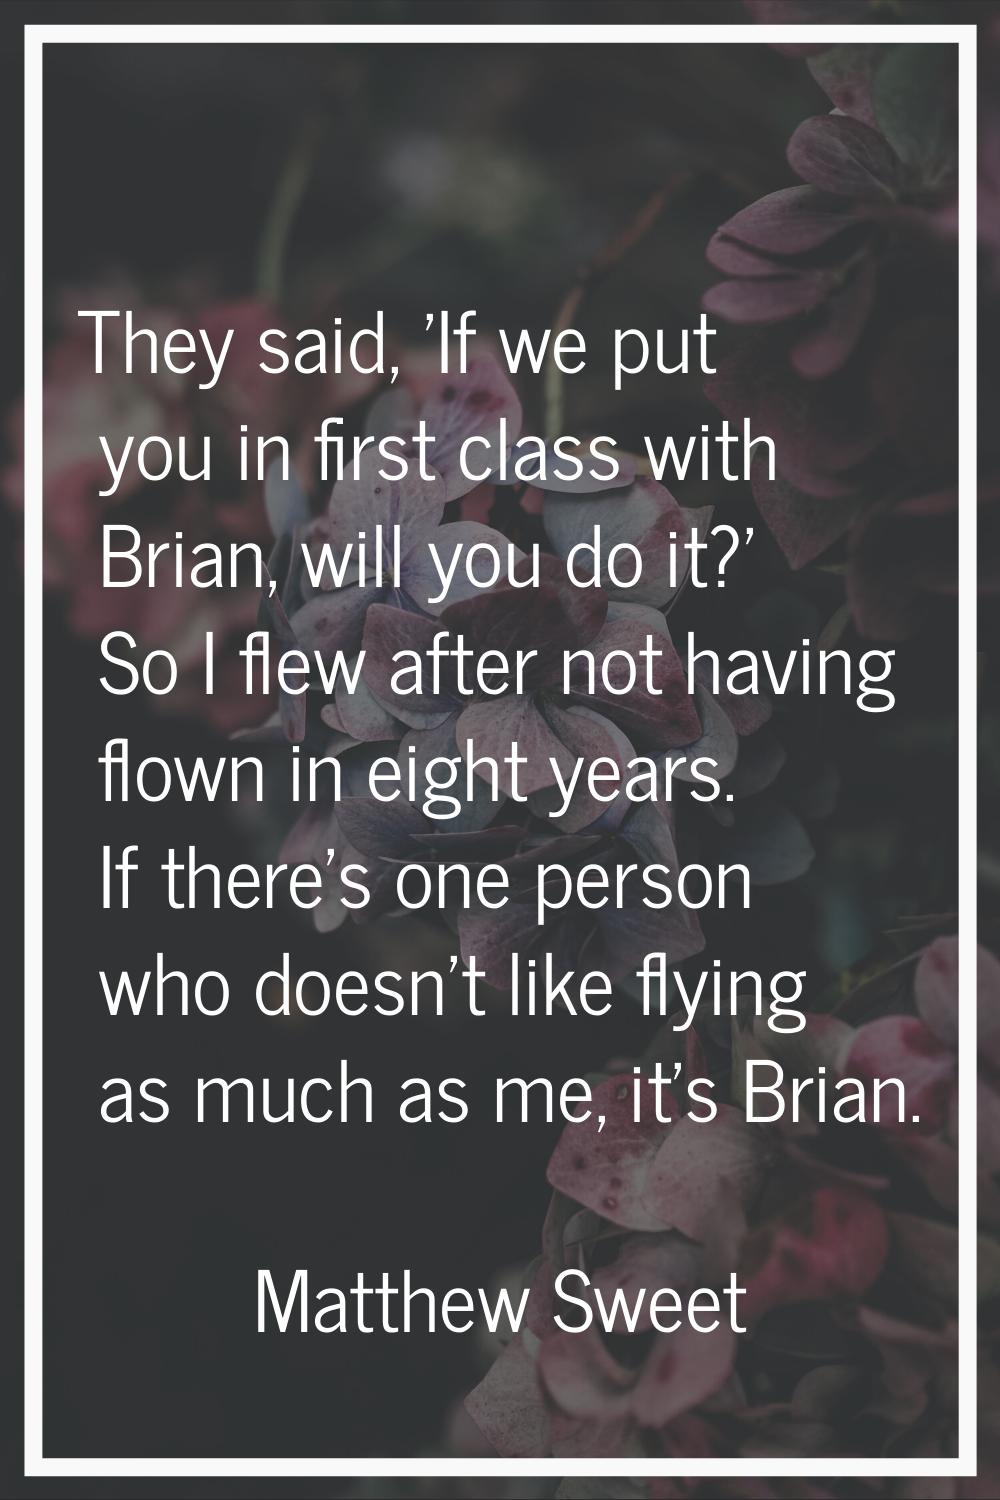 They said, 'If we put you in first class with Brian, will you do it?' So I flew after not having fl